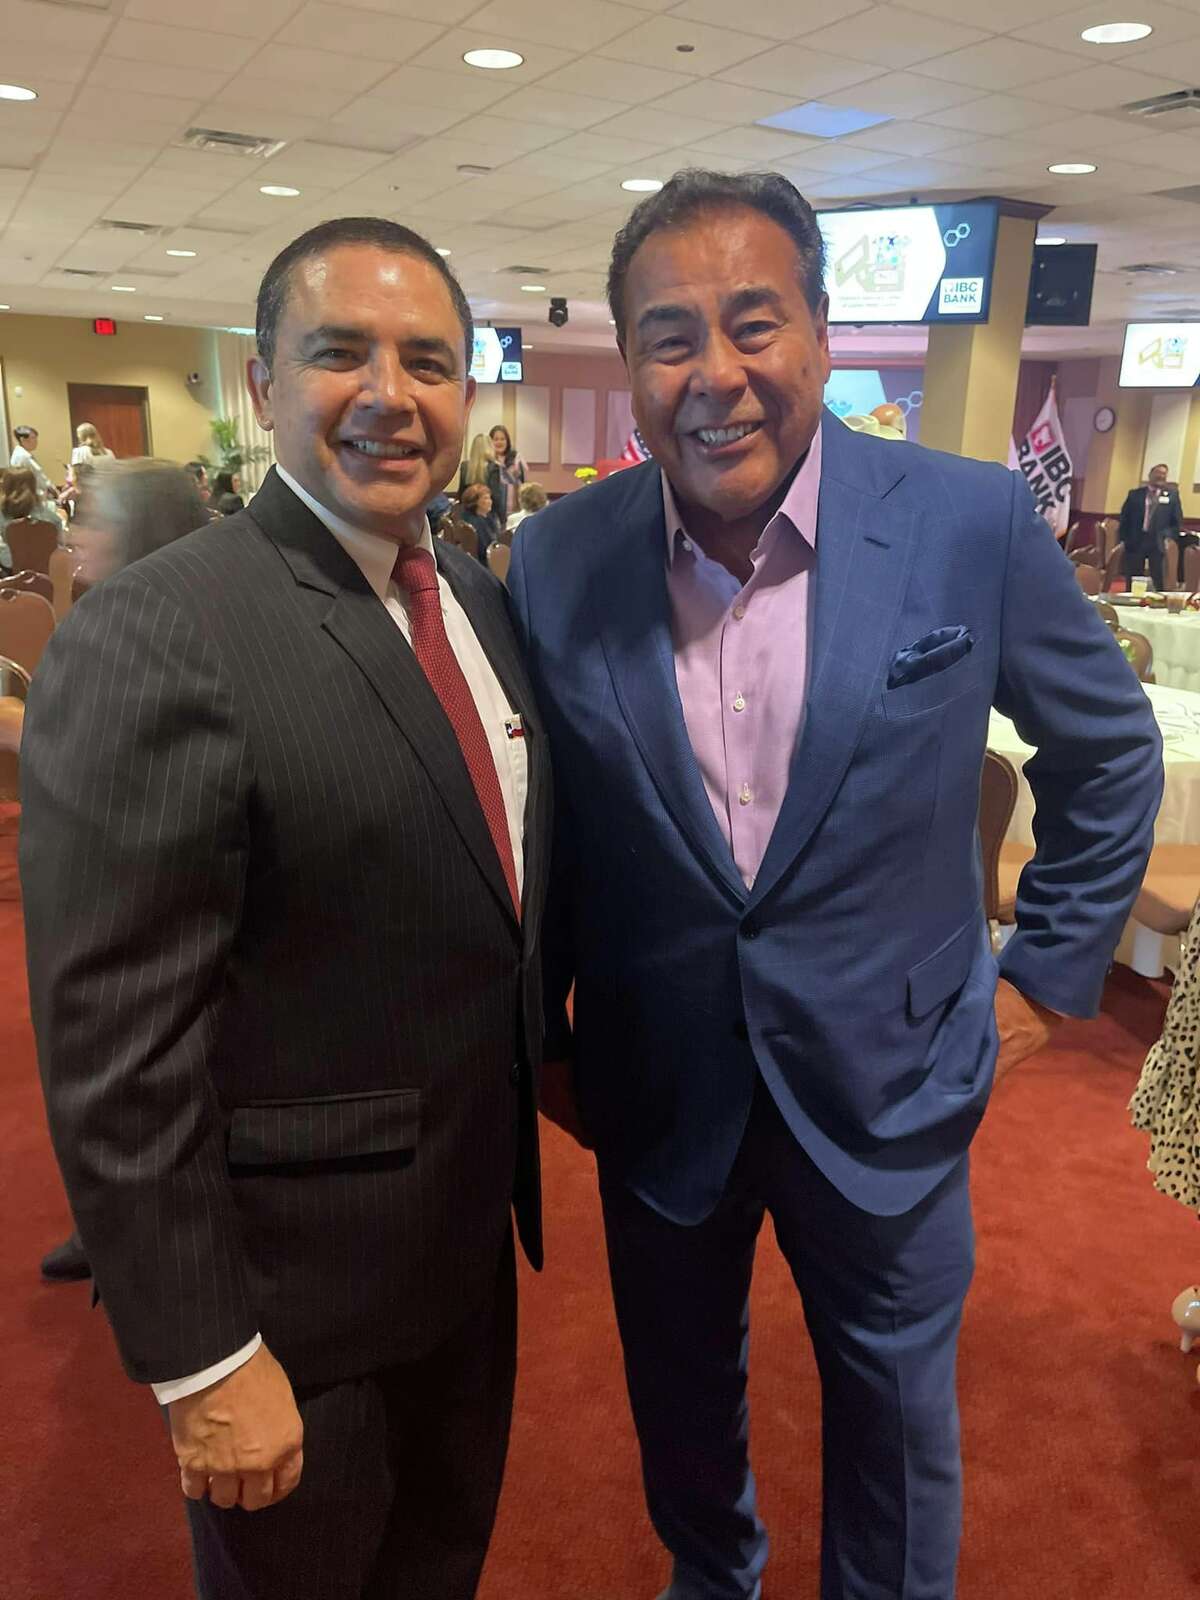 Rep. Henry Cuellar is pictured with ABC reporter John Quiñones at the IBC Annex on Thursday, Aug. 18, 2022. Quiñones gave a speech as part of the Children’s Advocacy Center’s annual dinner.